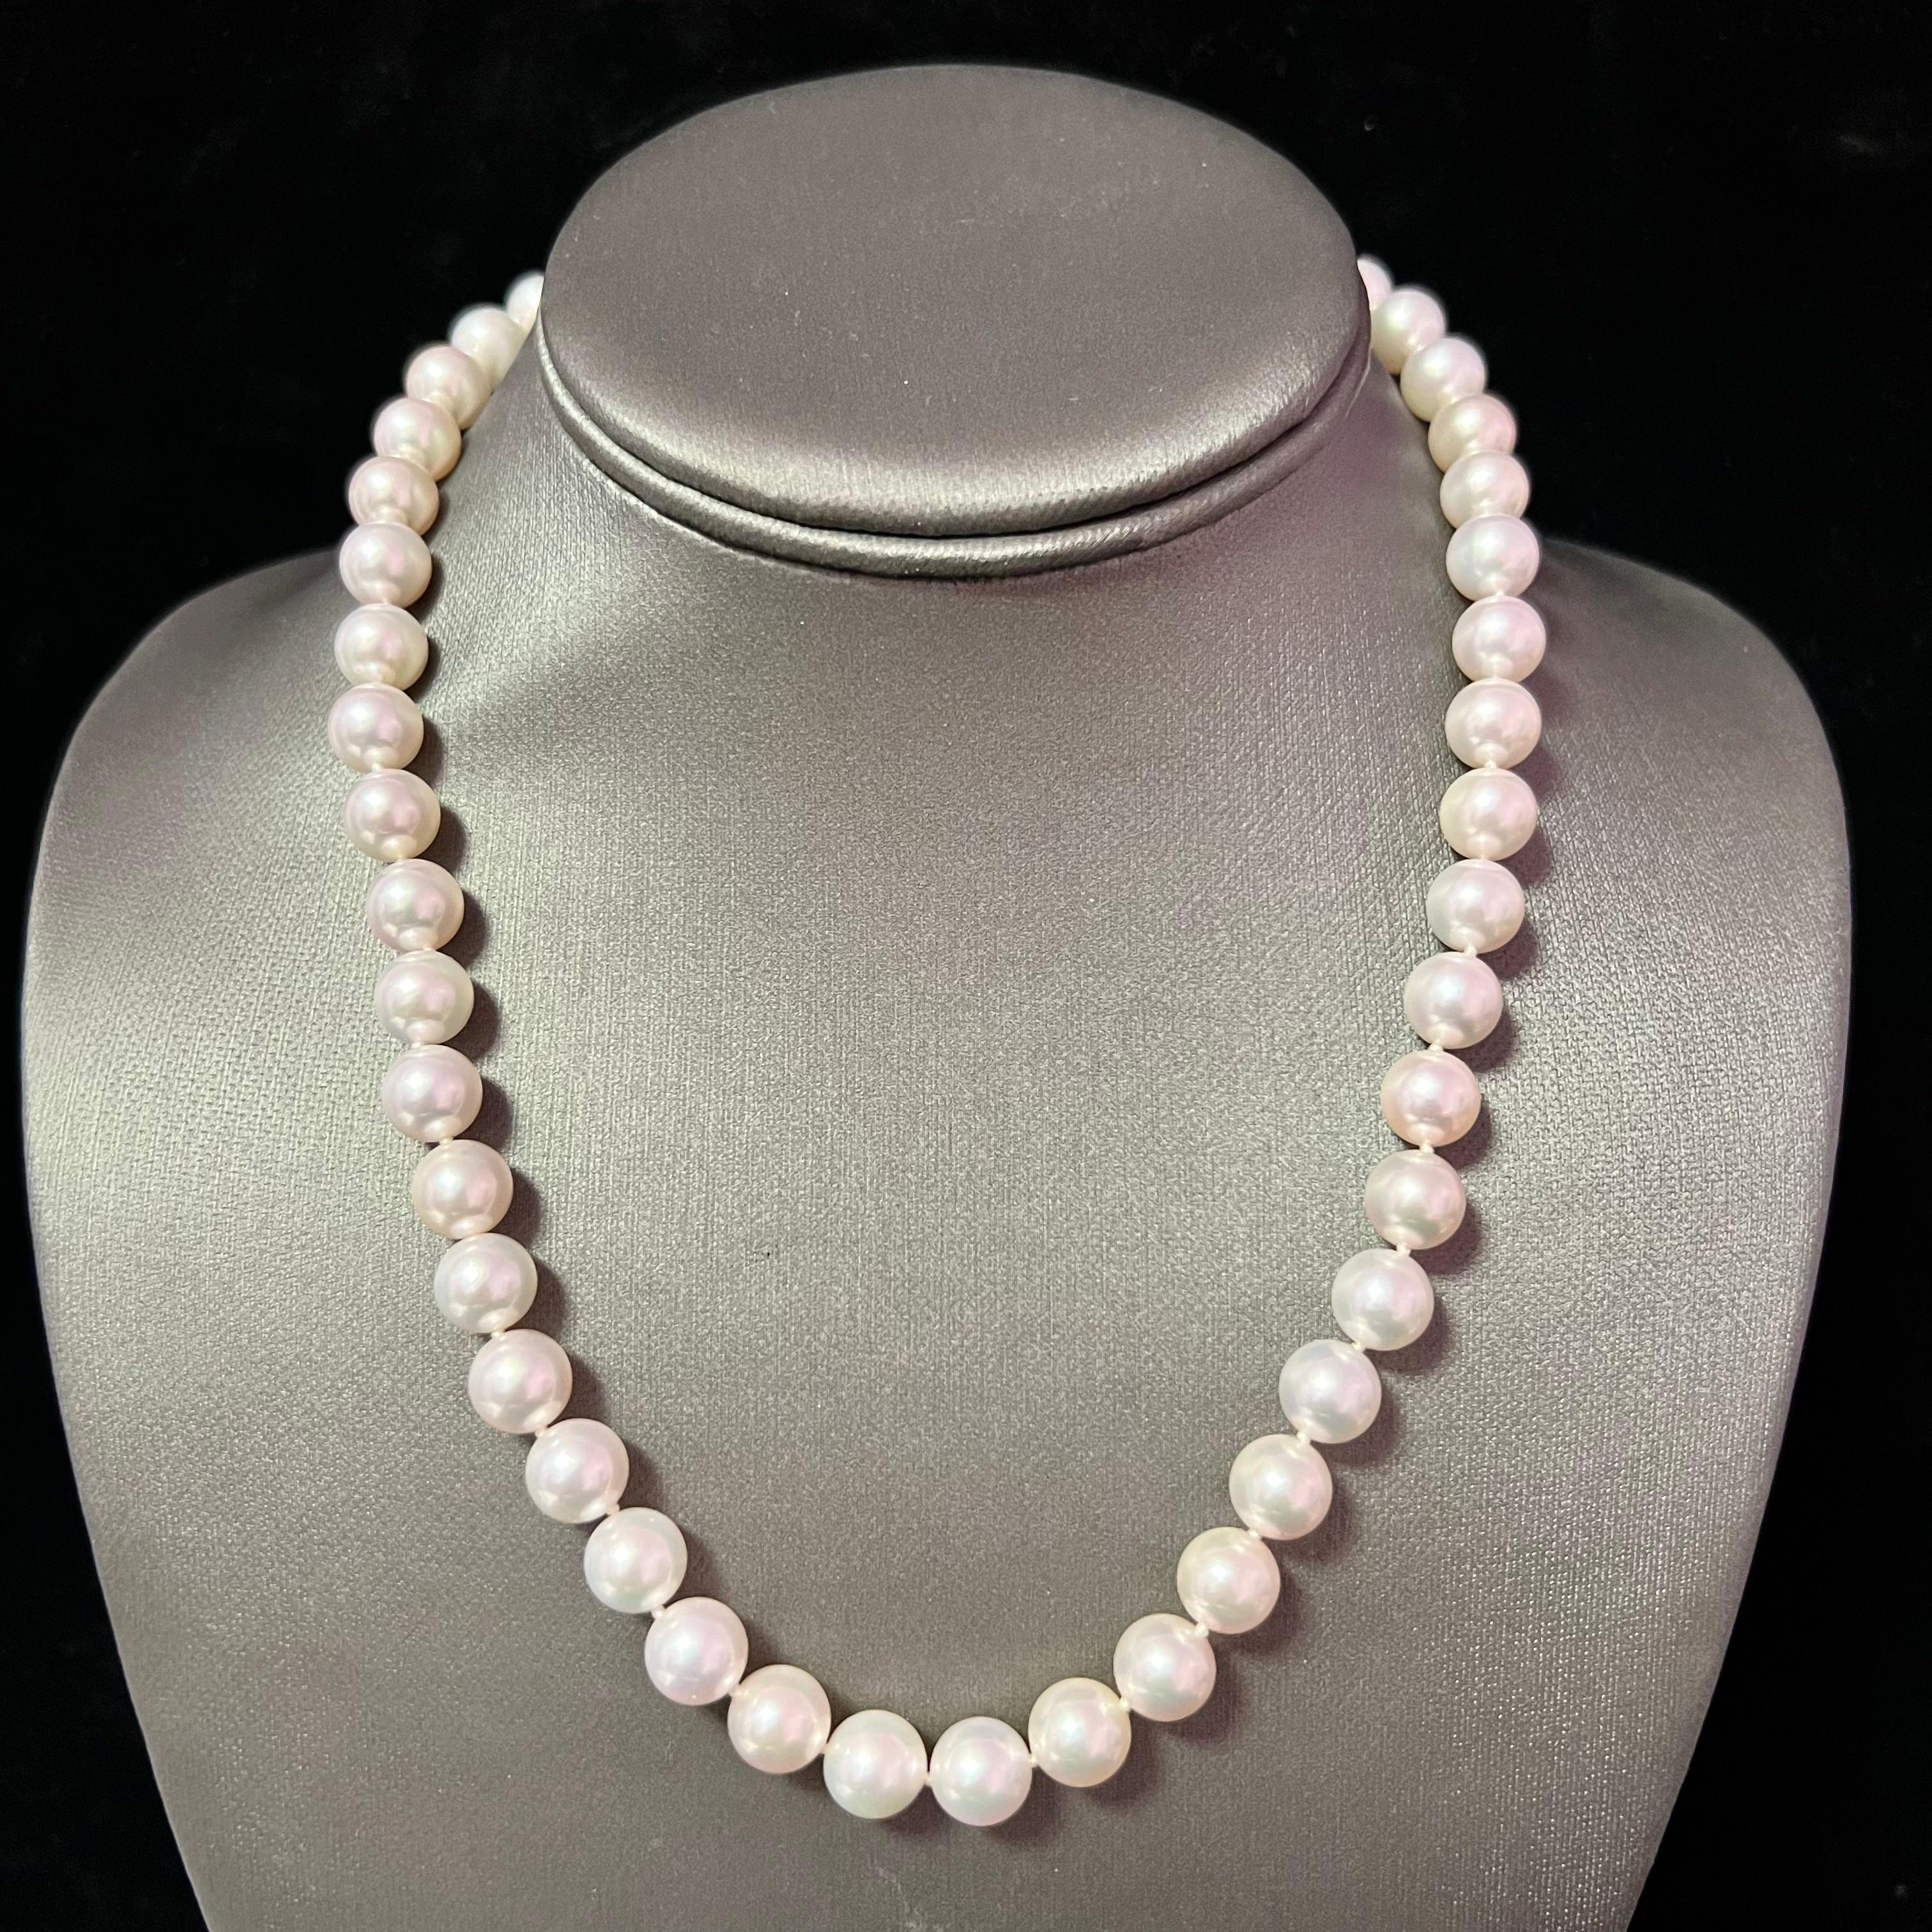 Mikimoto Estate Akoya Pearl Necklace 14k Gold 9 mm AAA Certified 2